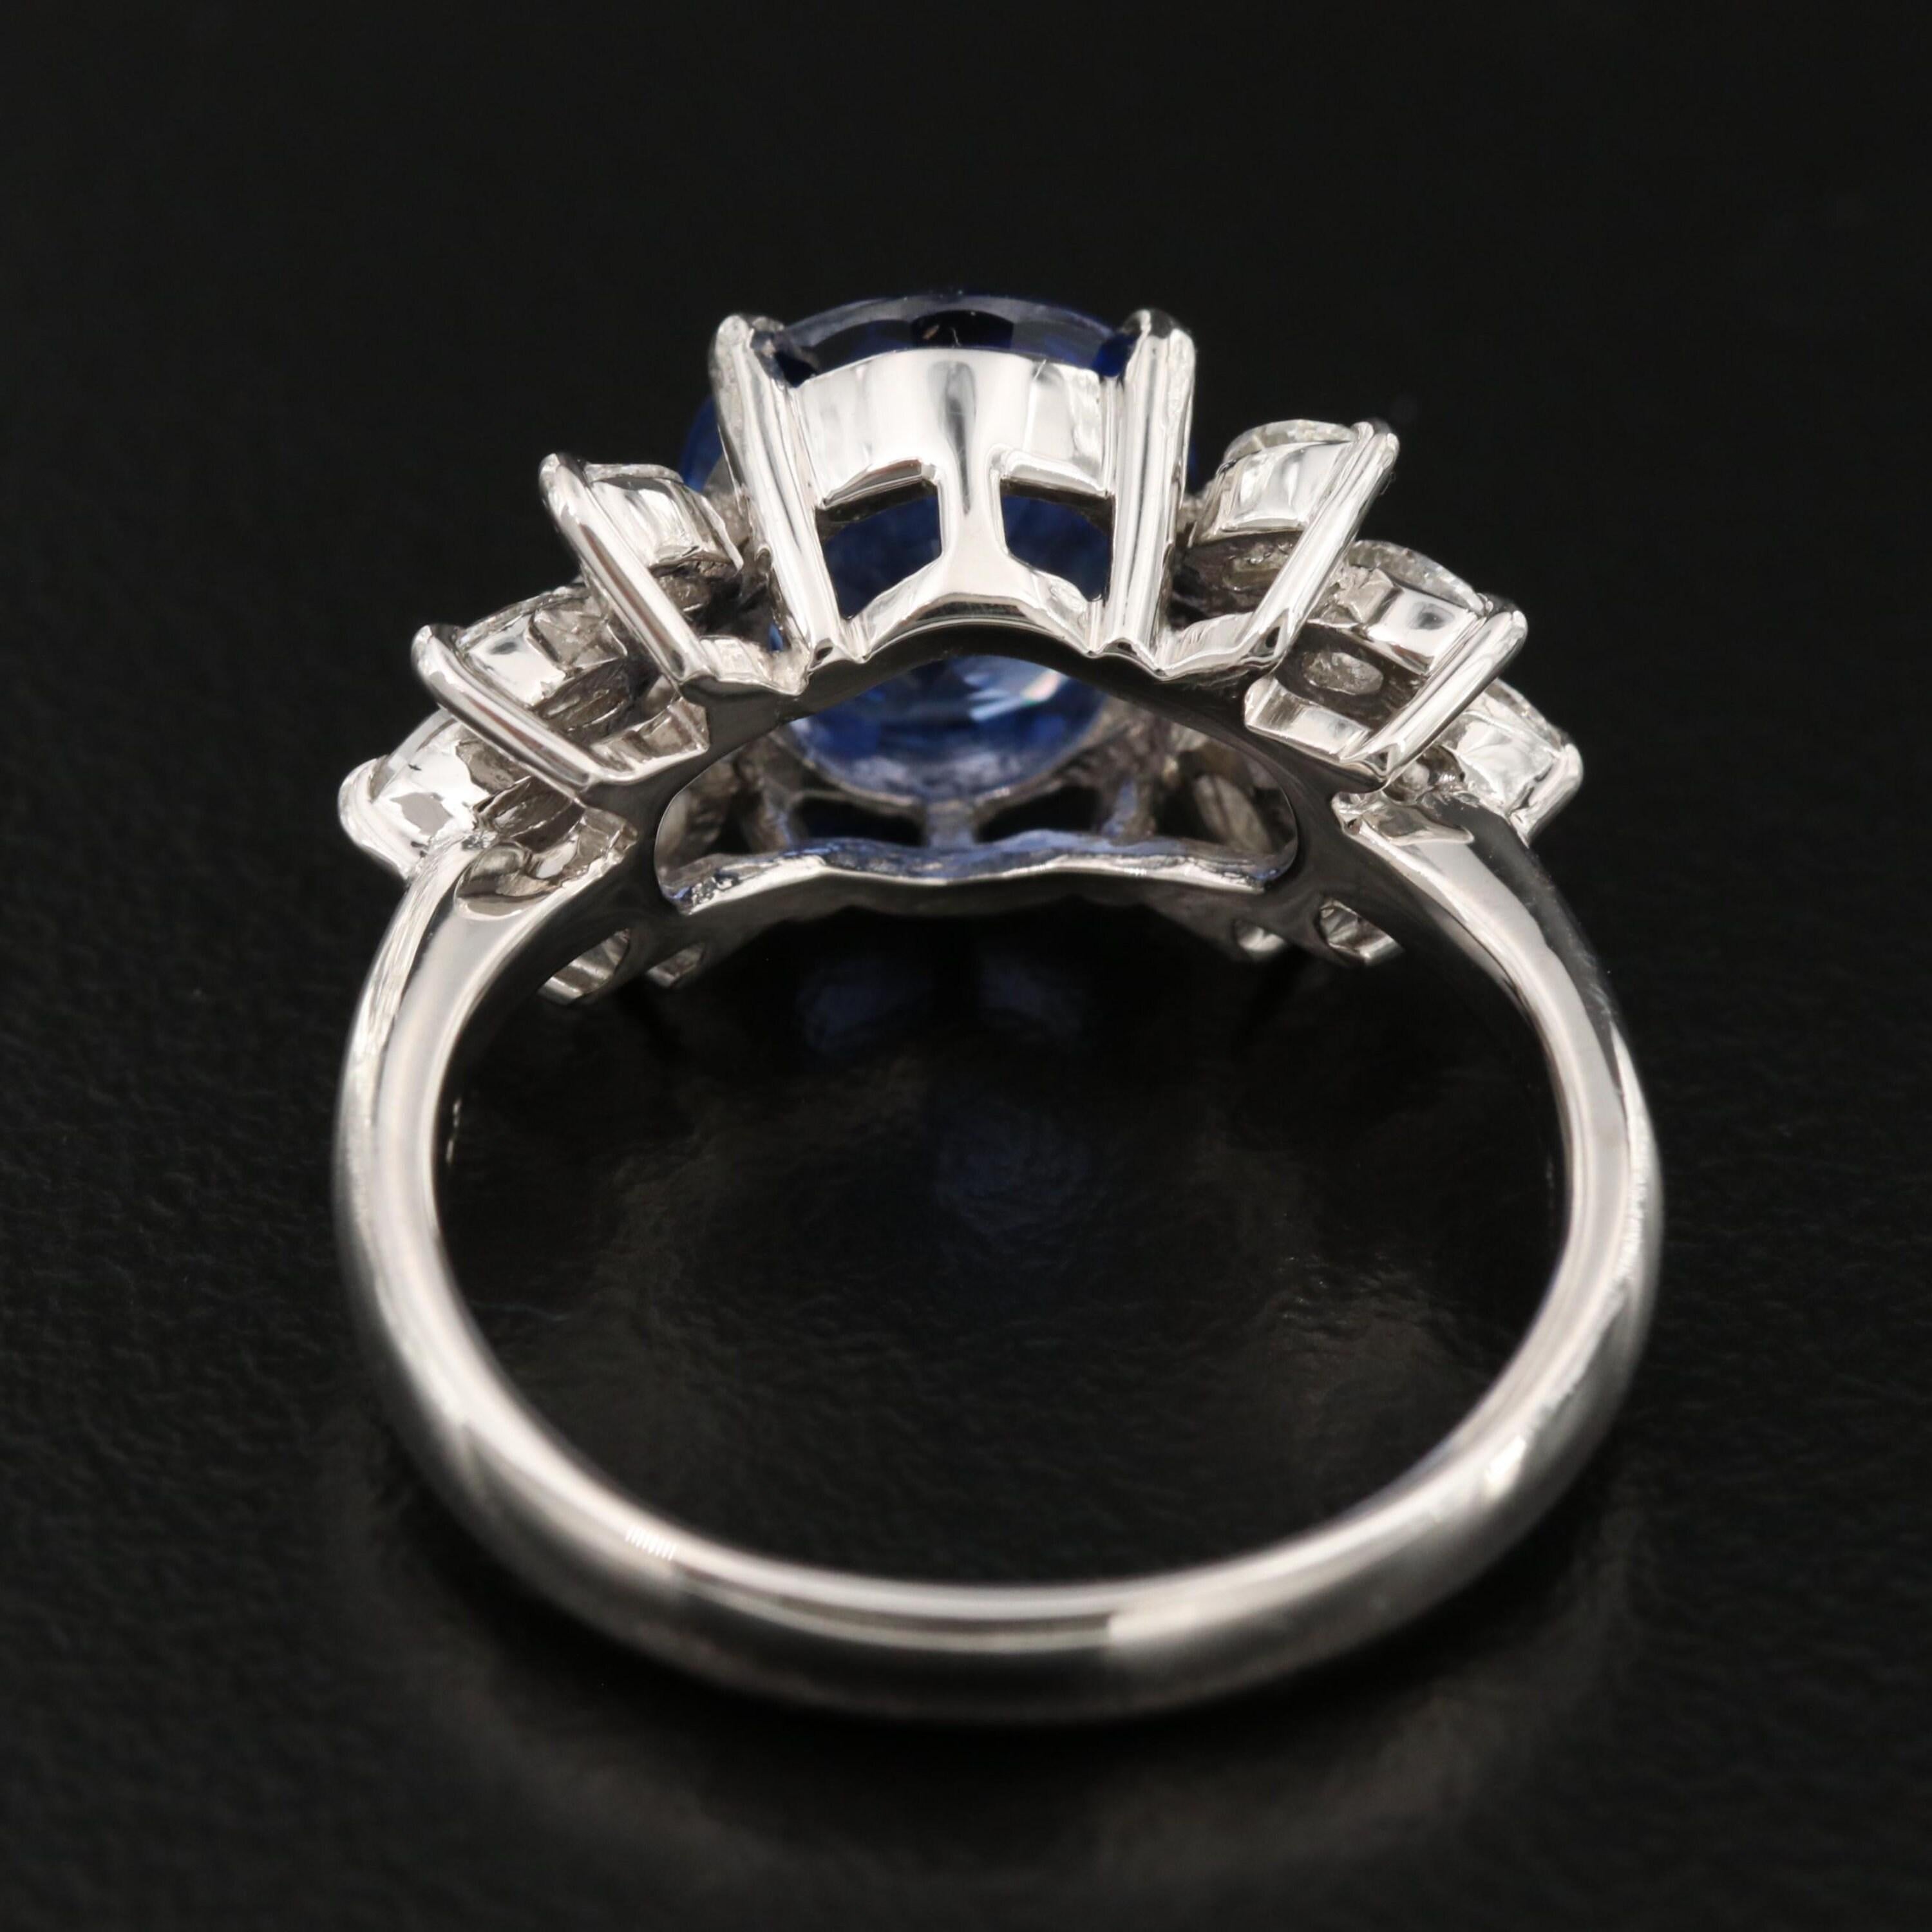 For Sale:  1.8 Carat Sapphire and Diamond Engagement Ring White Gold Sapphire Wedding Ring 3